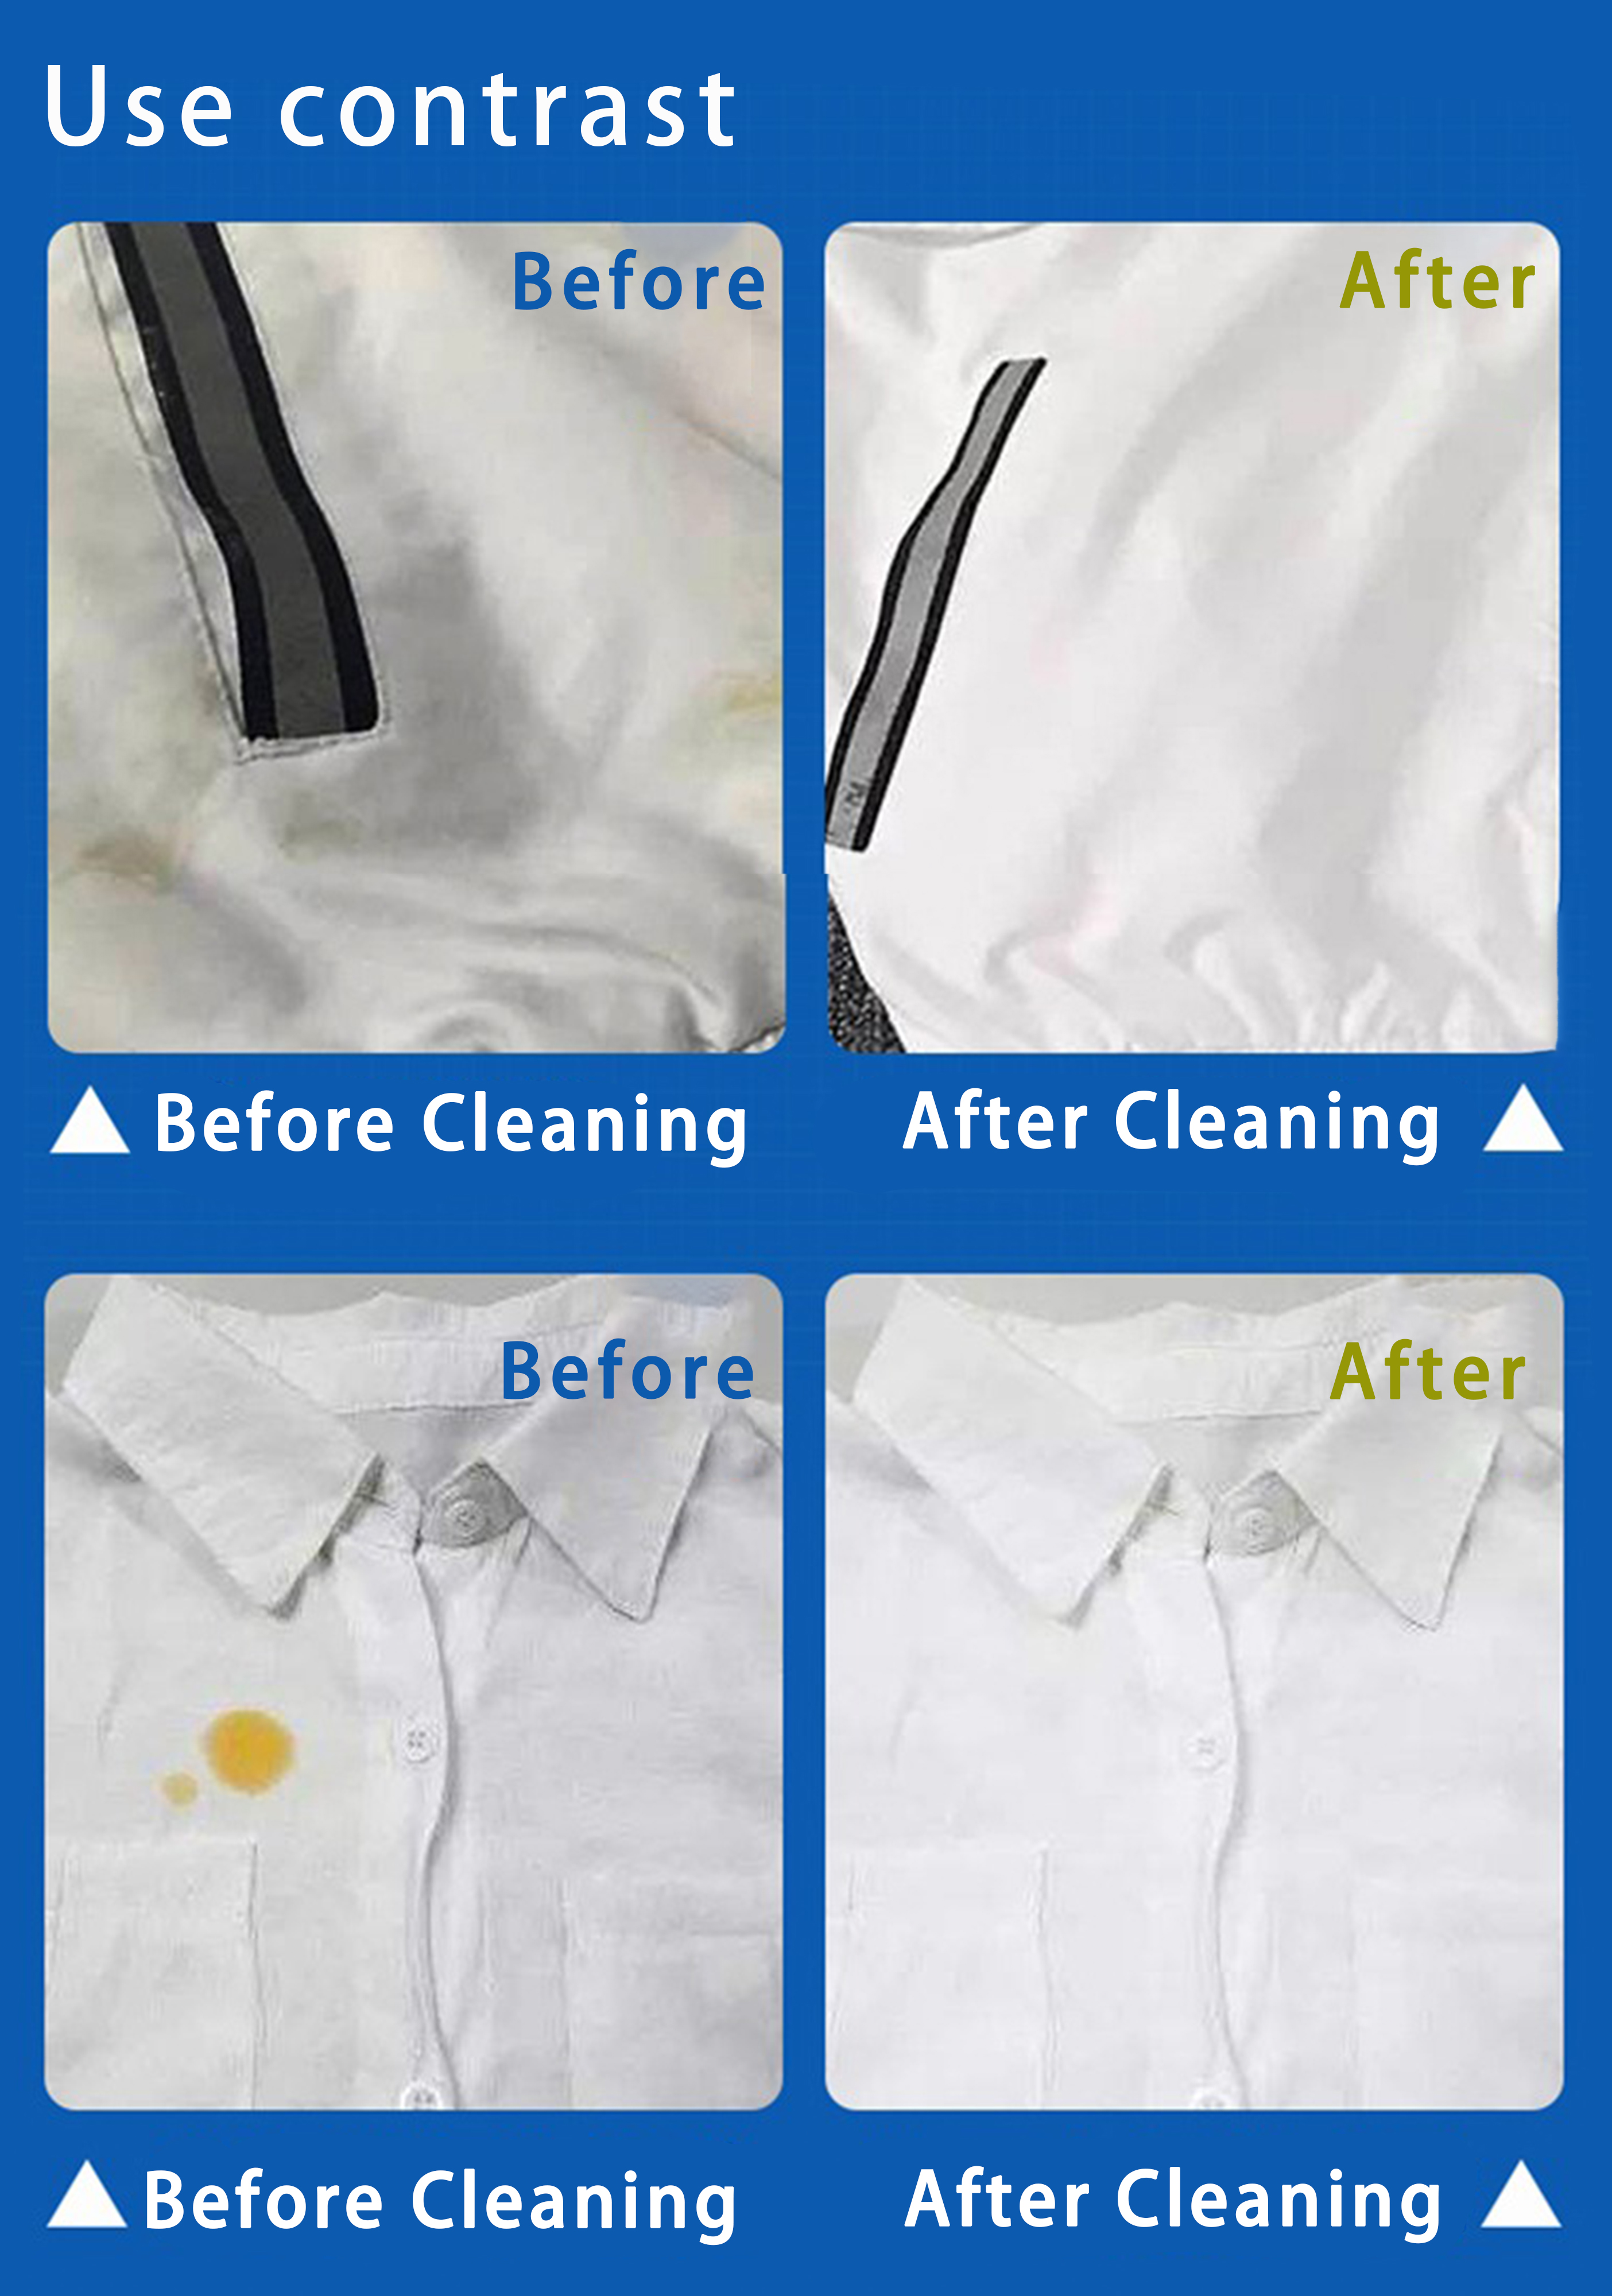 Dry Cleaning Solvent